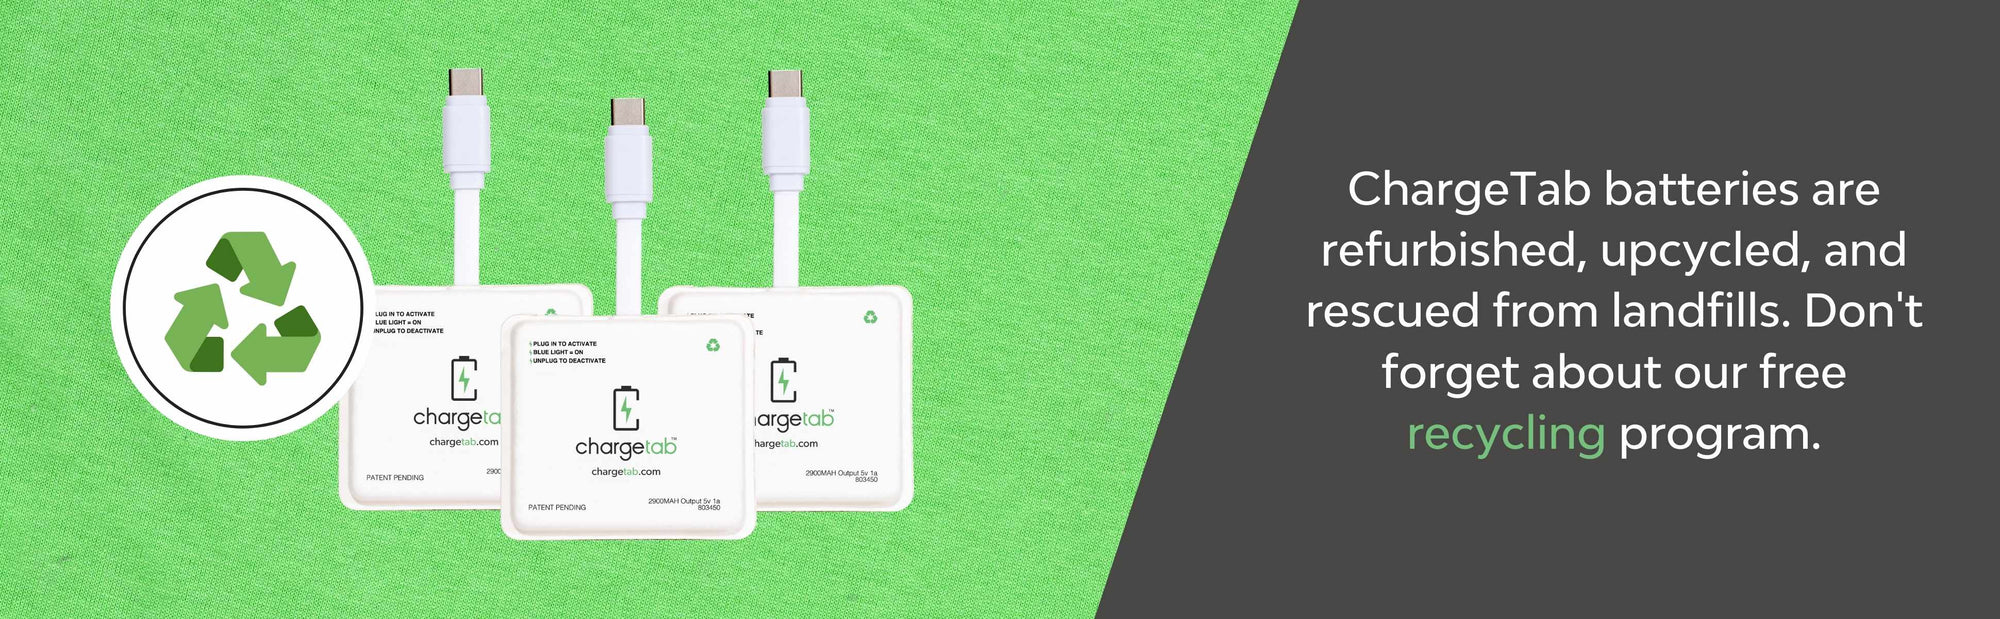 USB-C Battery Recycling Program - Chargetab